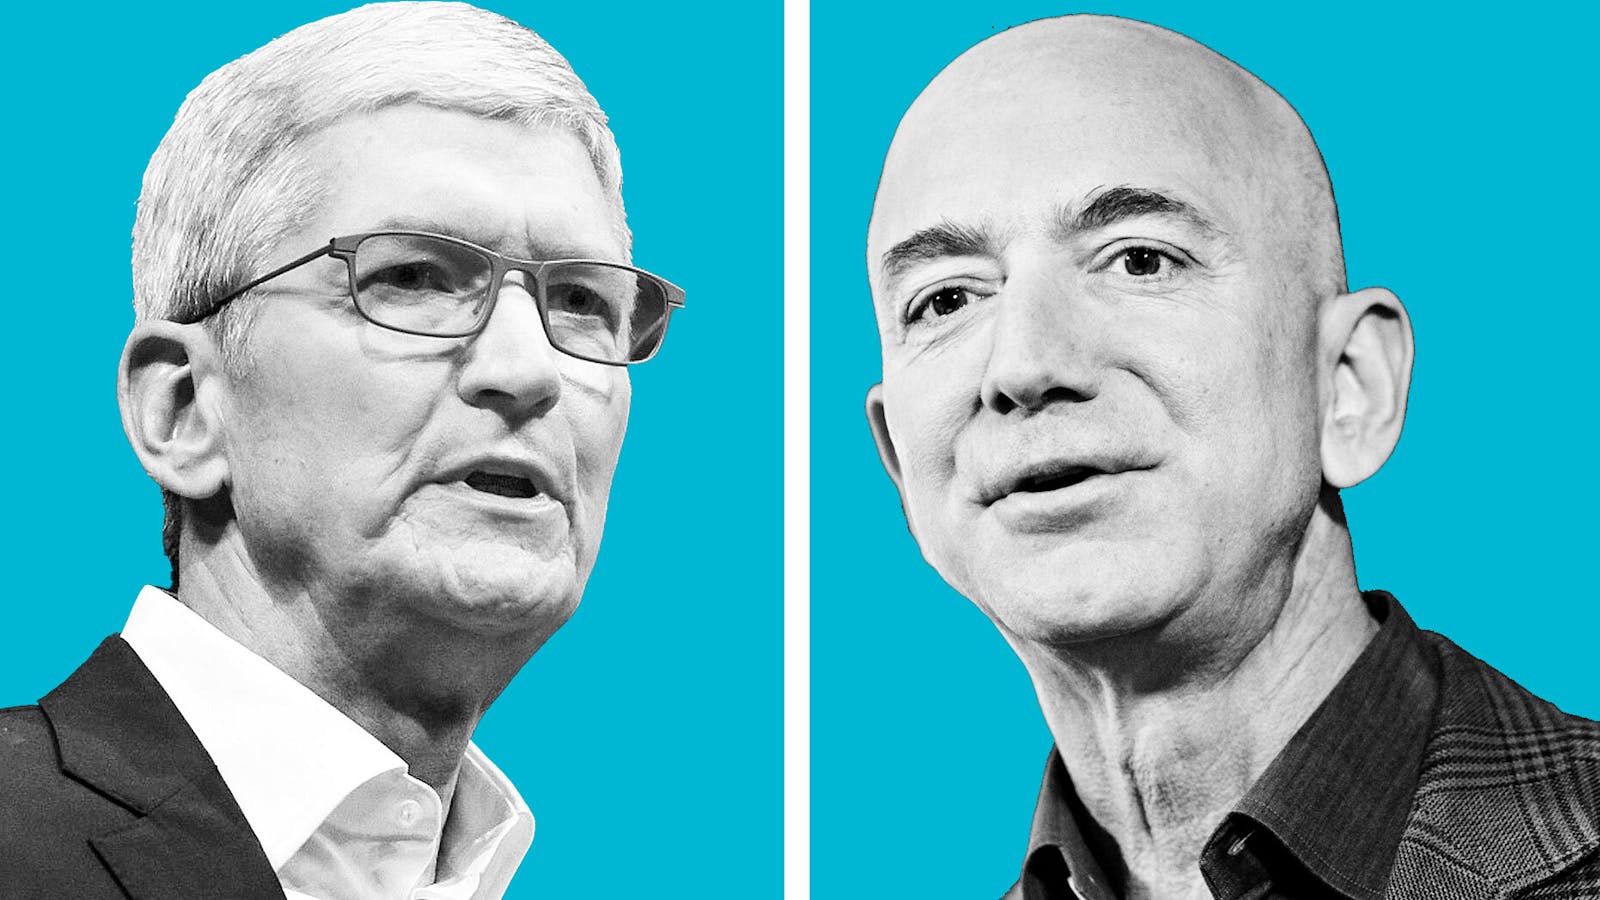 Apple's Tim Cook  and Amazon's Jeff Bezos. Photo by Bloomberg